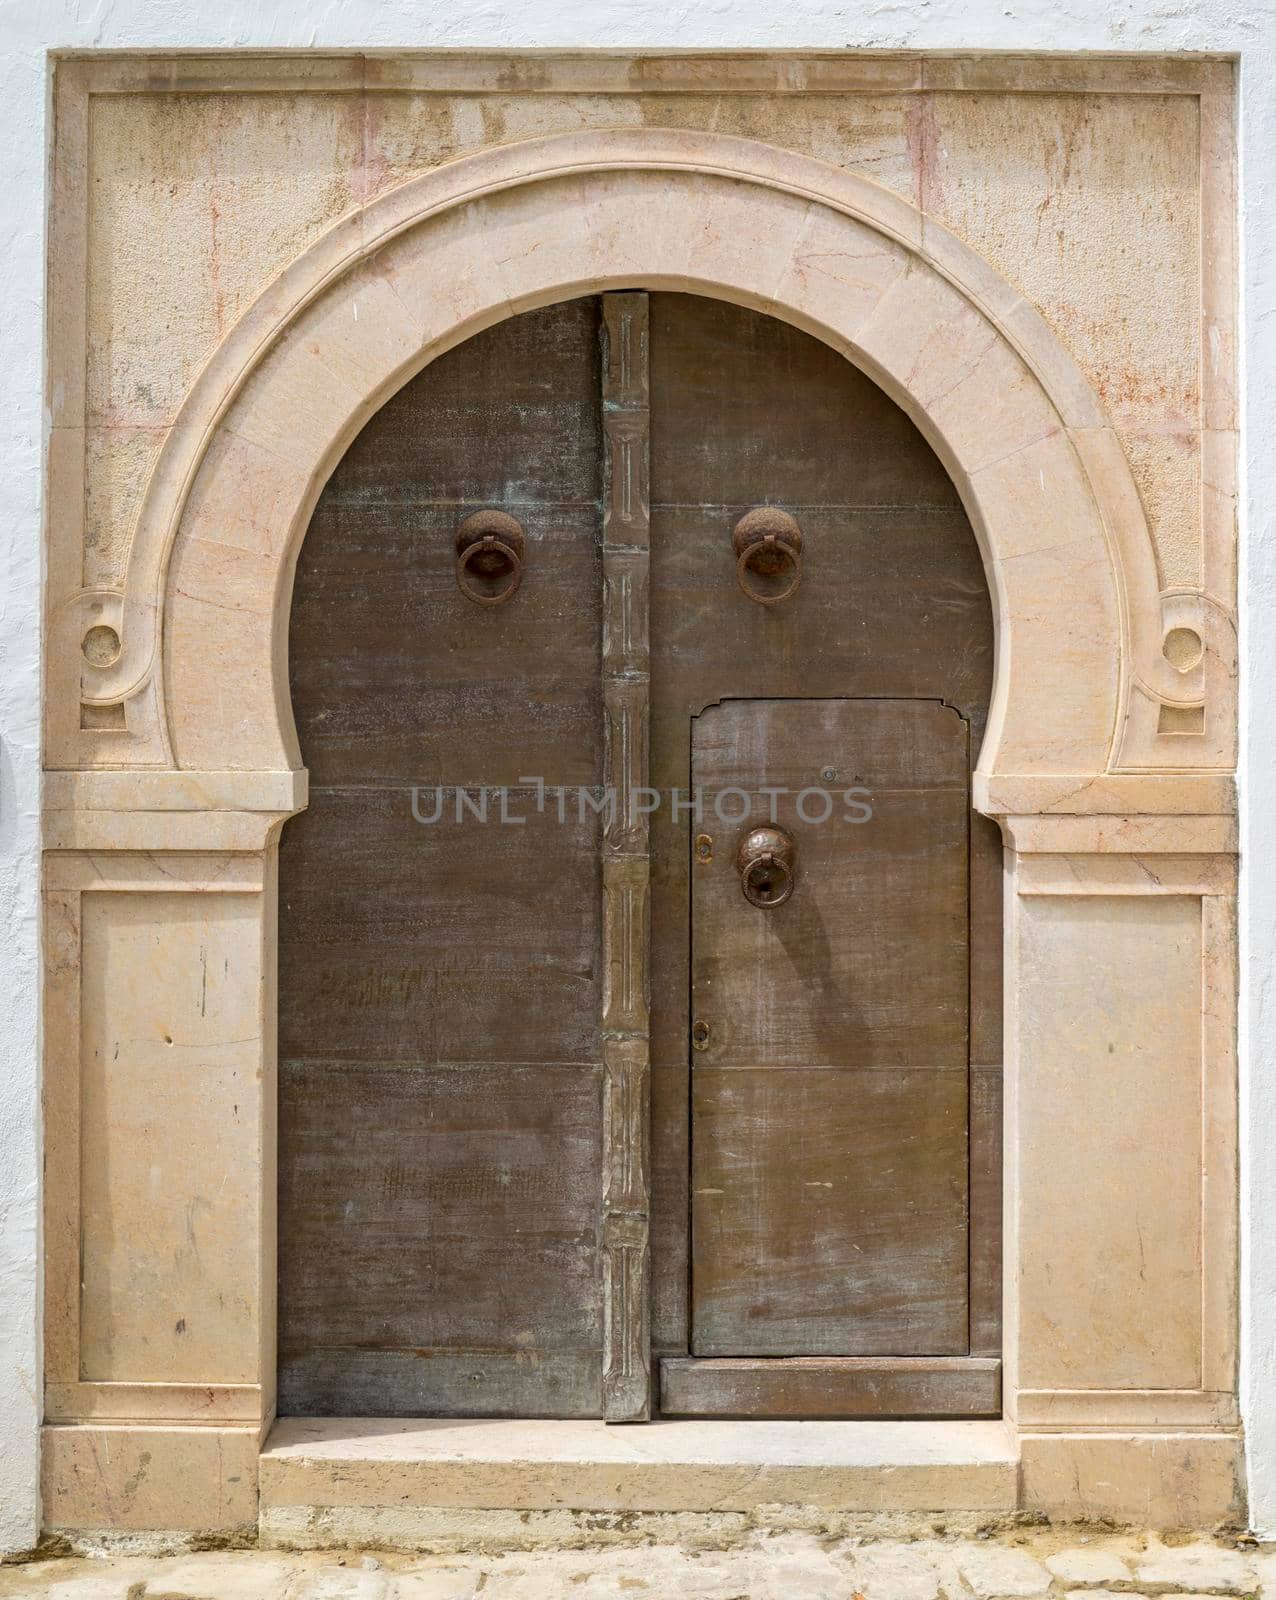 Aged door in Andalusian style from Sidi Bou Said in Tunisia